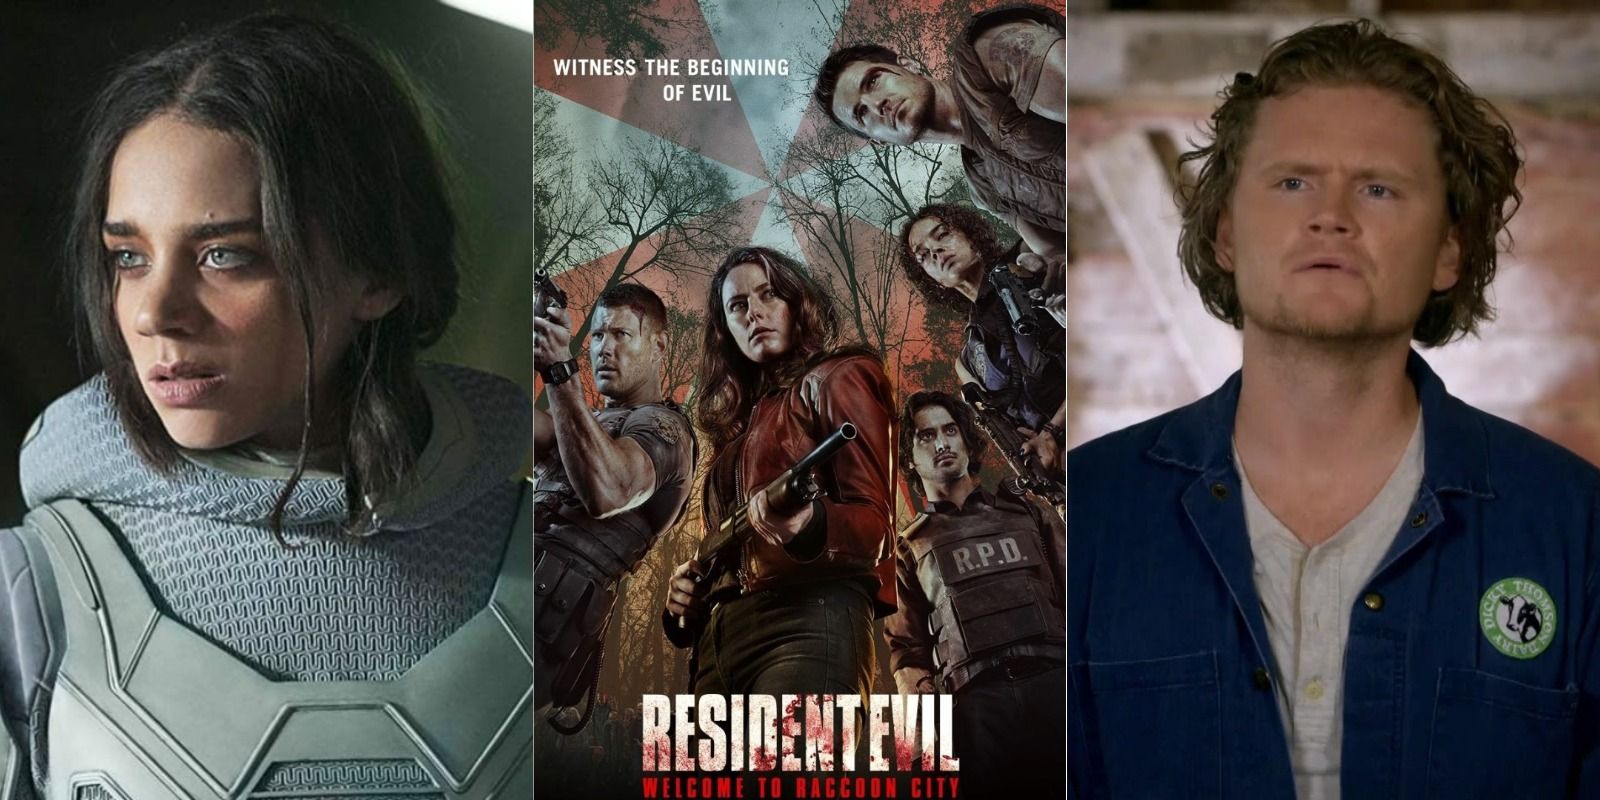 10 Movies & TV Shows You’ve Seen The Cast Of Resident Evil Welcome To Raccoon City